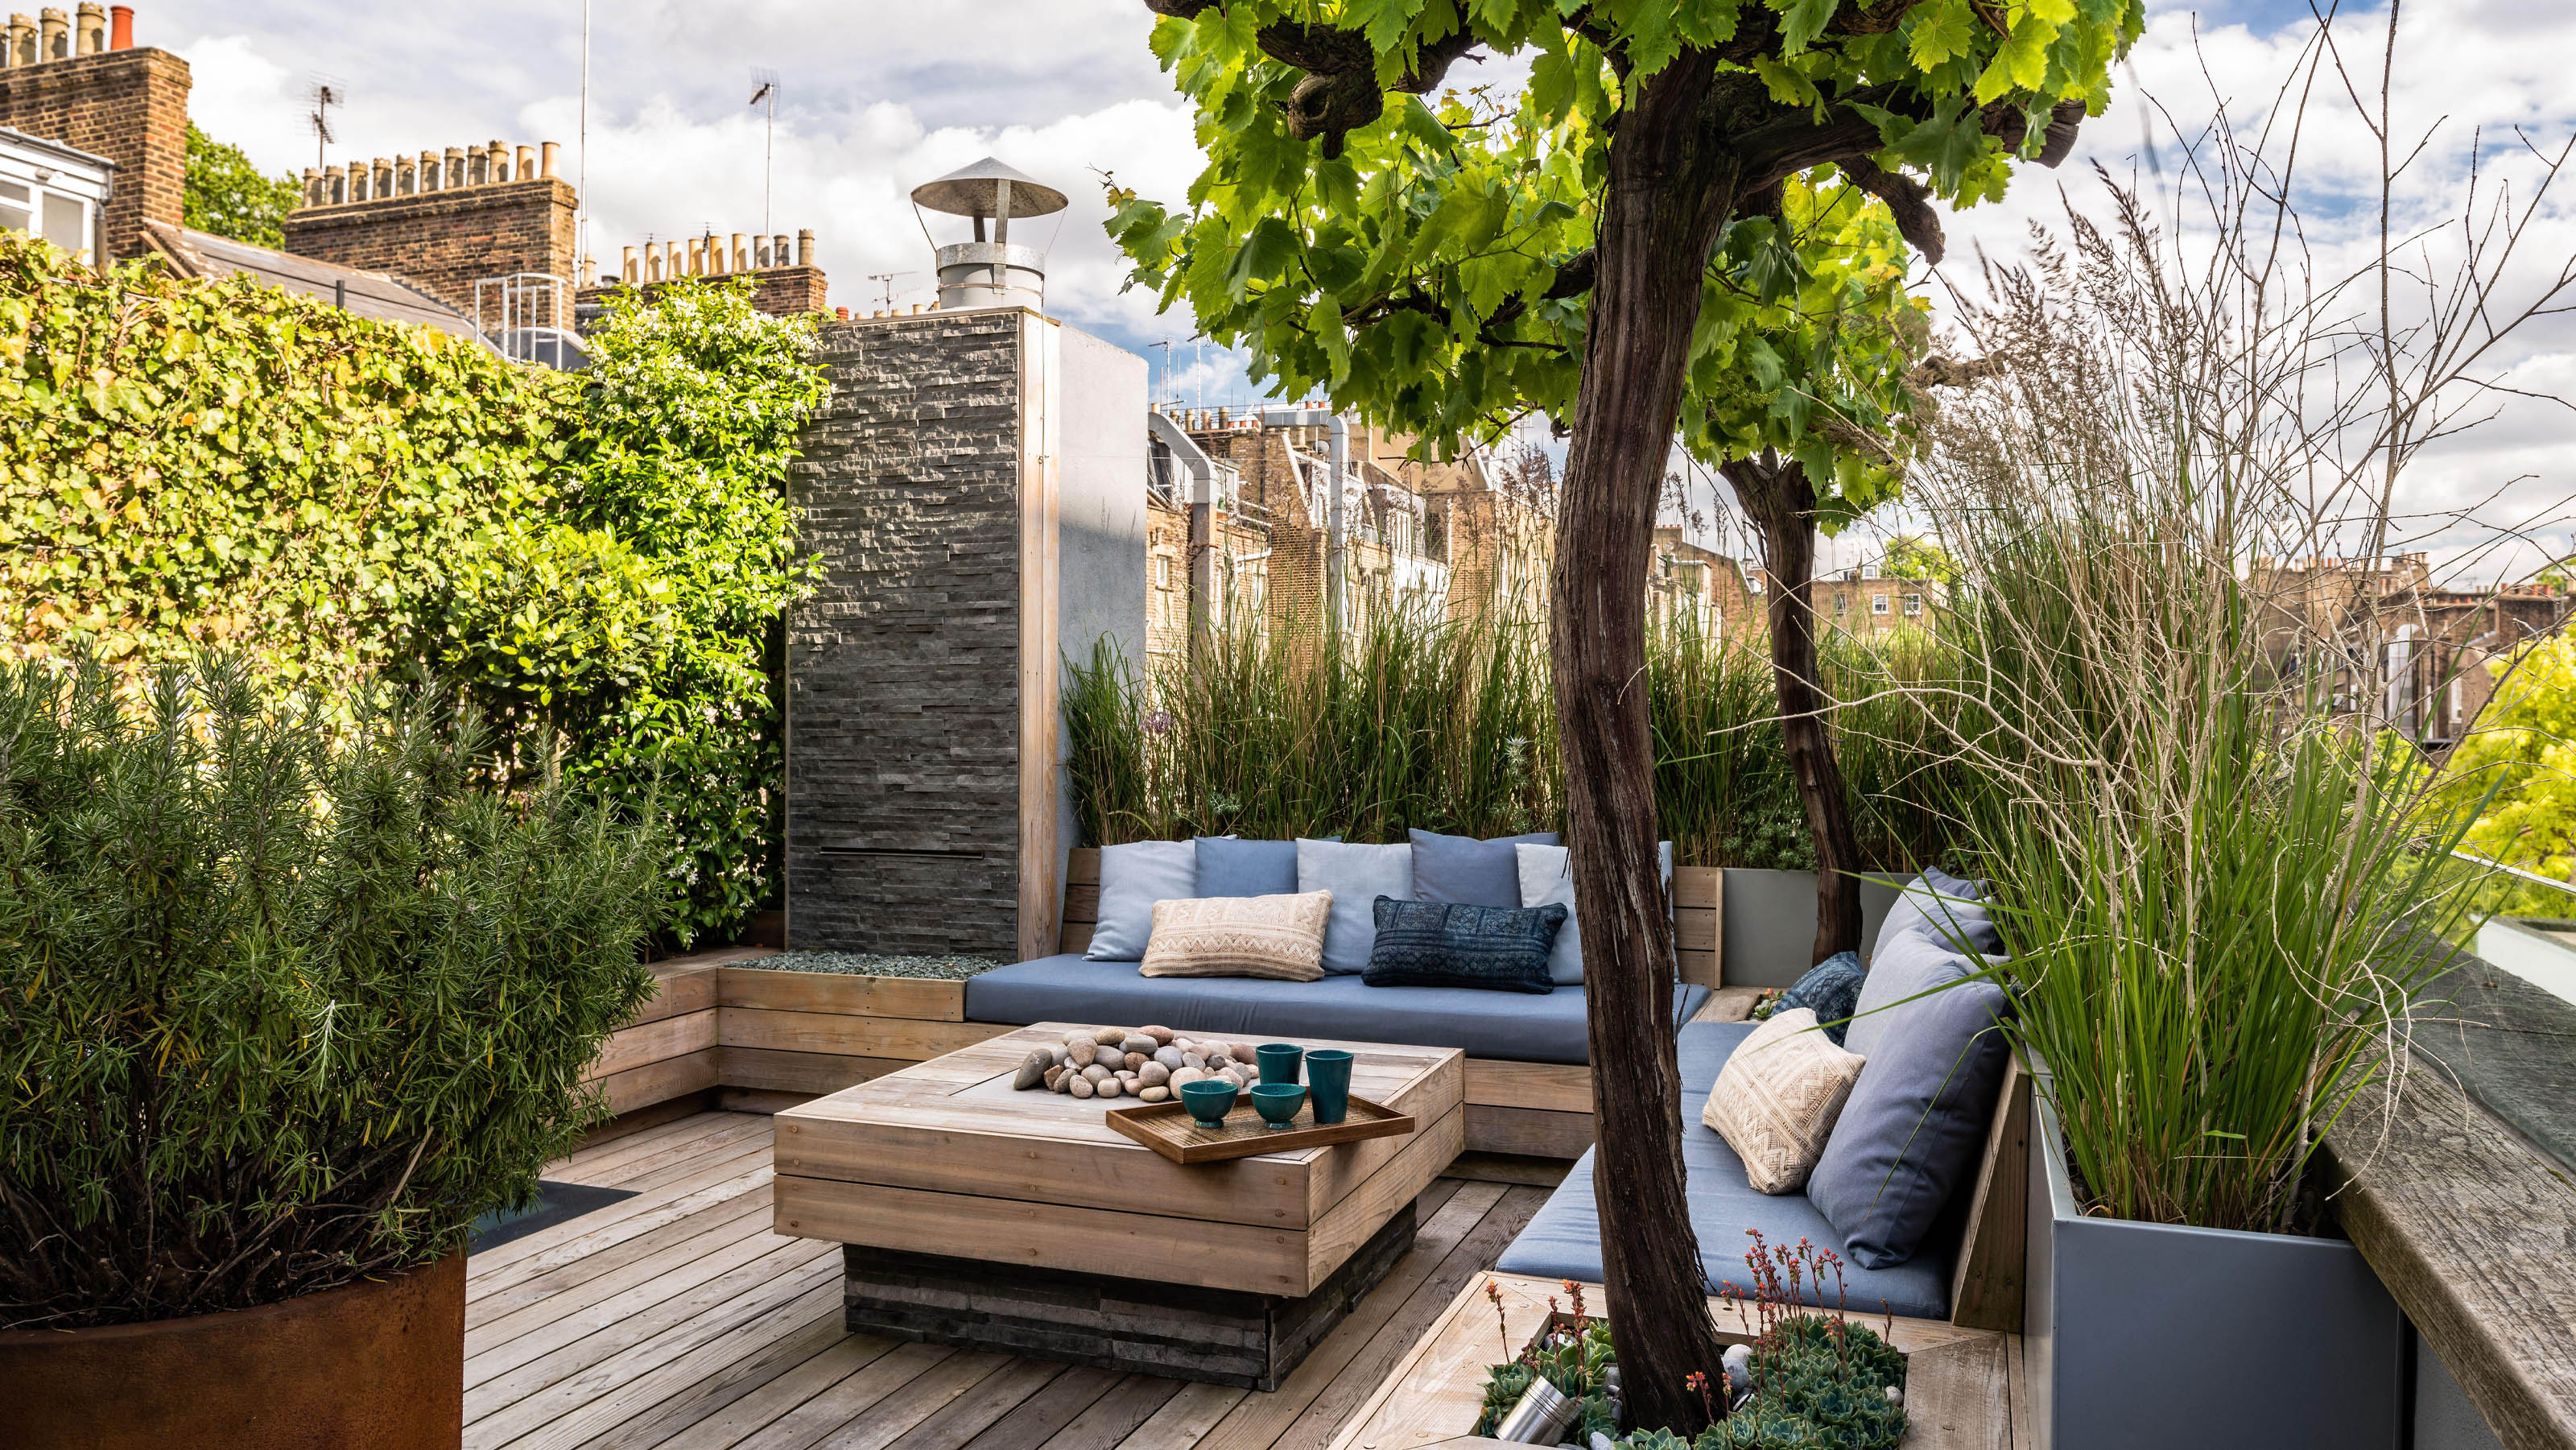 Garden design ideas 20 ways to update your space with planting ...